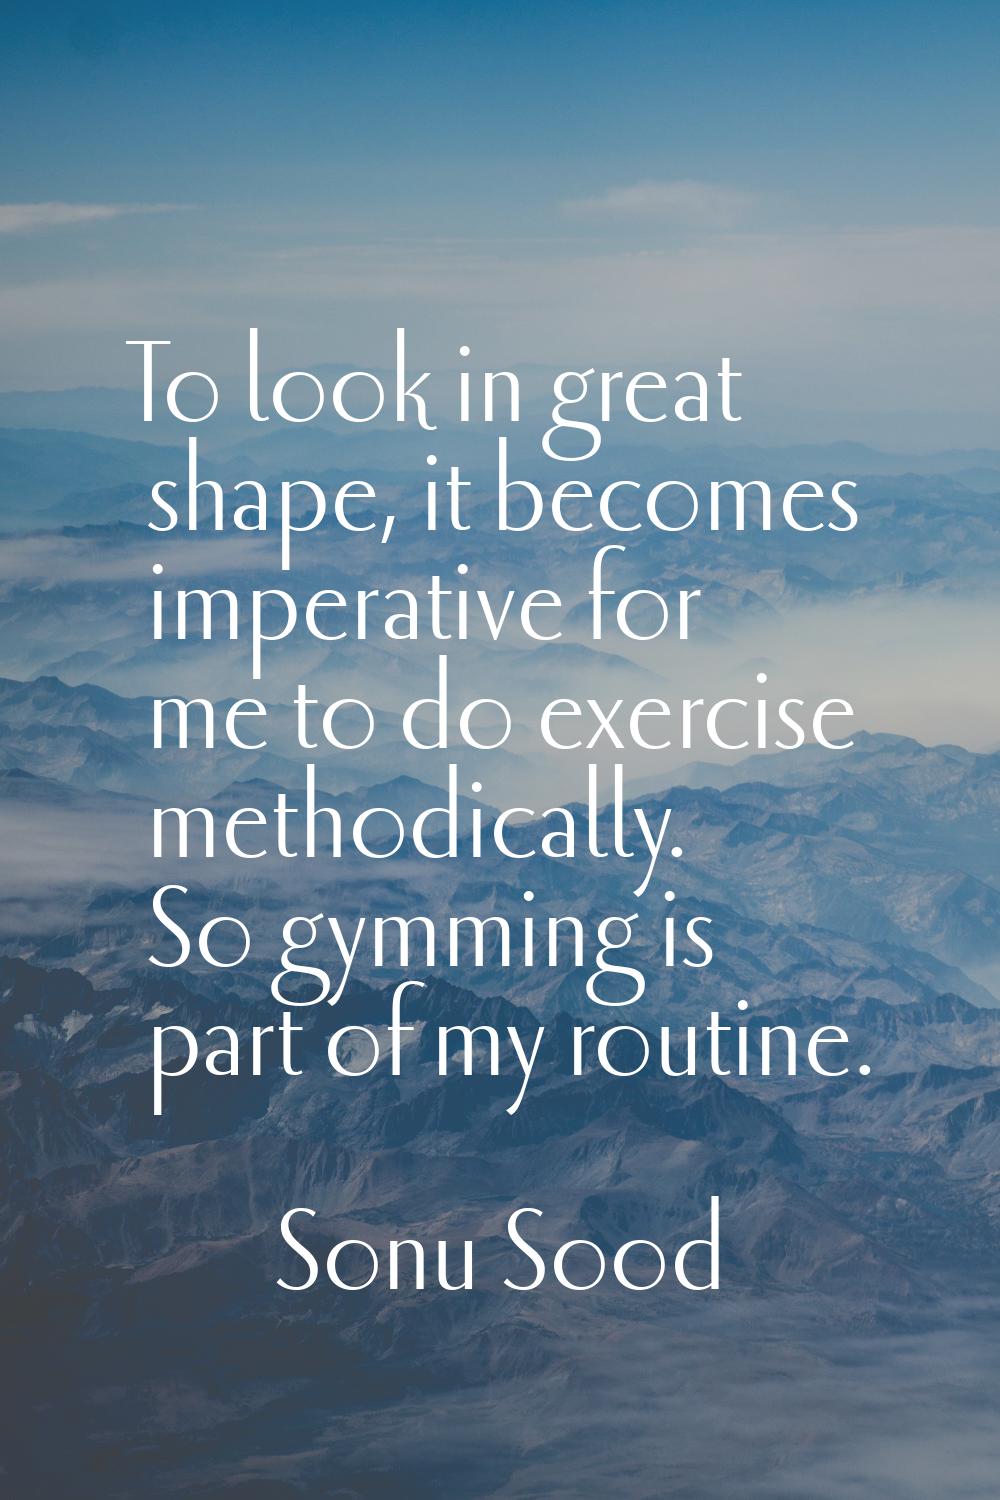 To look in great shape, it becomes imperative for me to do exercise methodically. So gymming is par